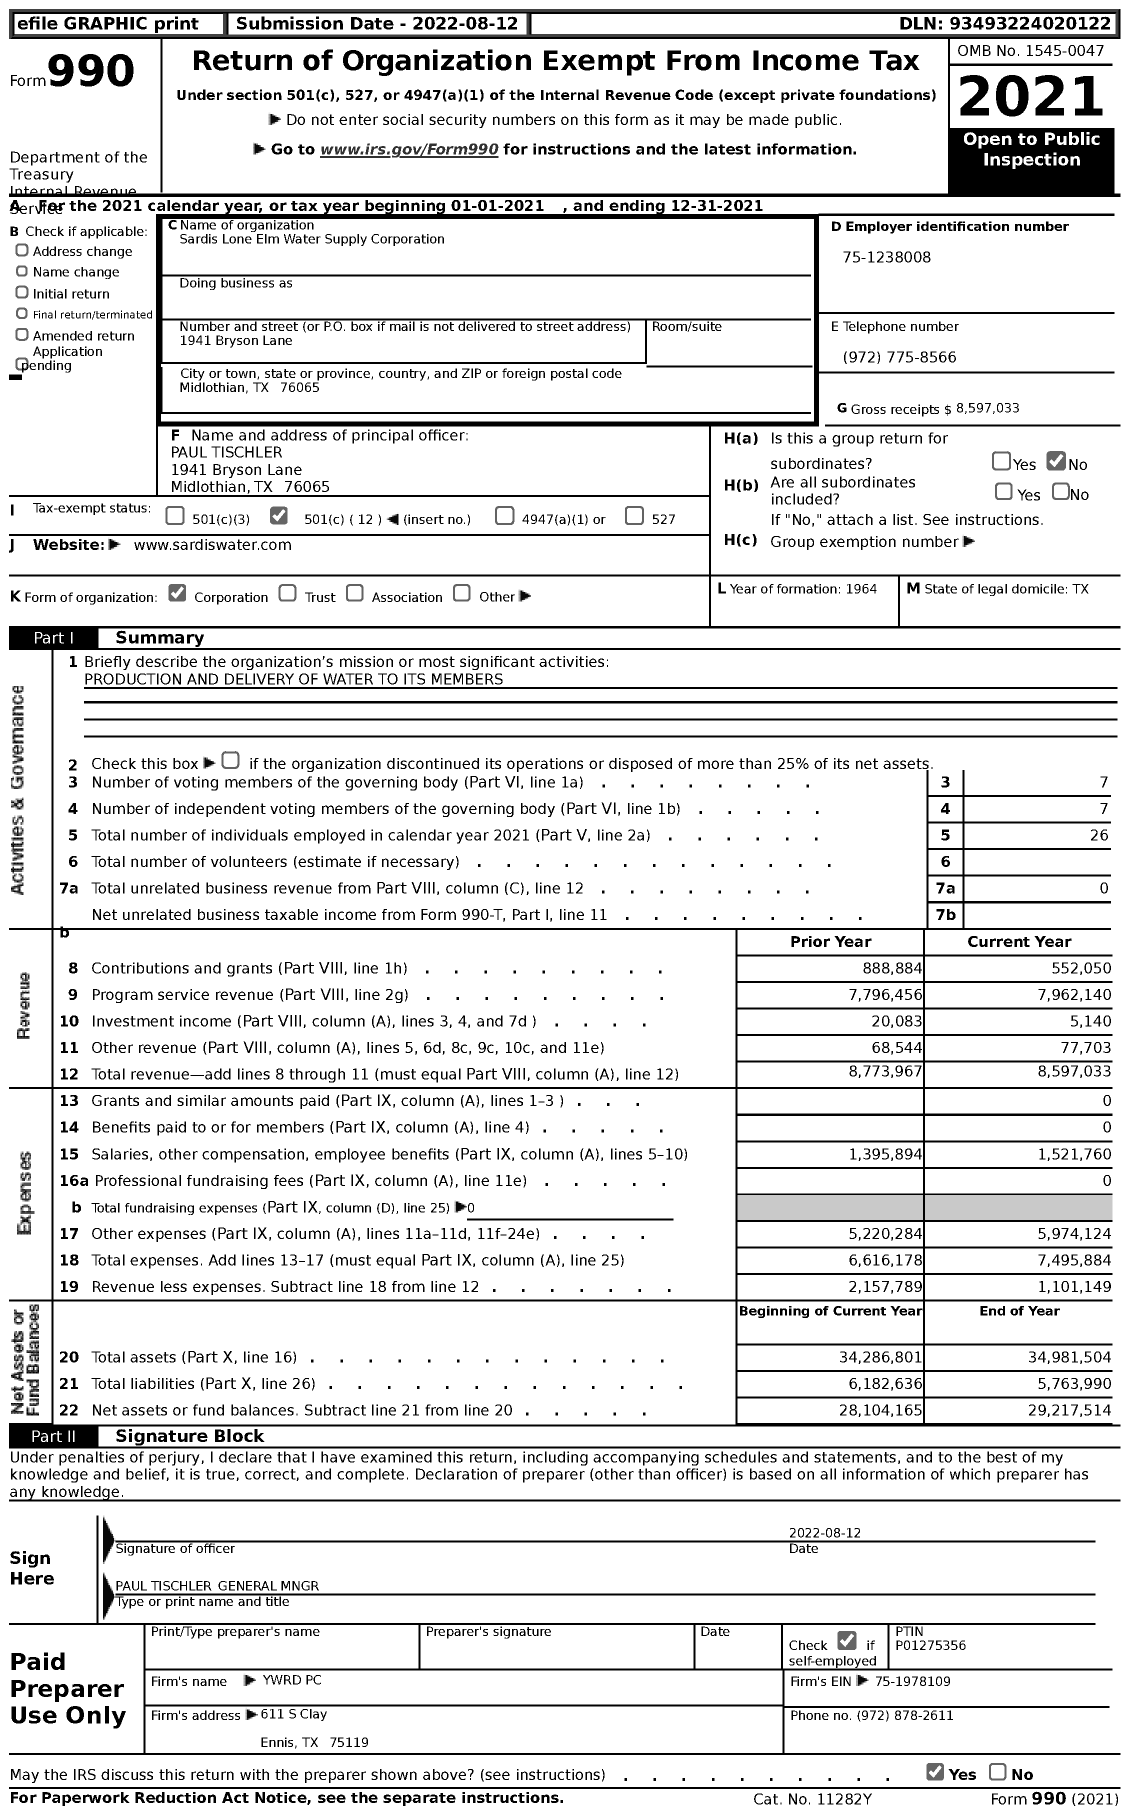 Image of first page of 2021 Form 990 for Sardis Lone Elm Water Supply Corporation